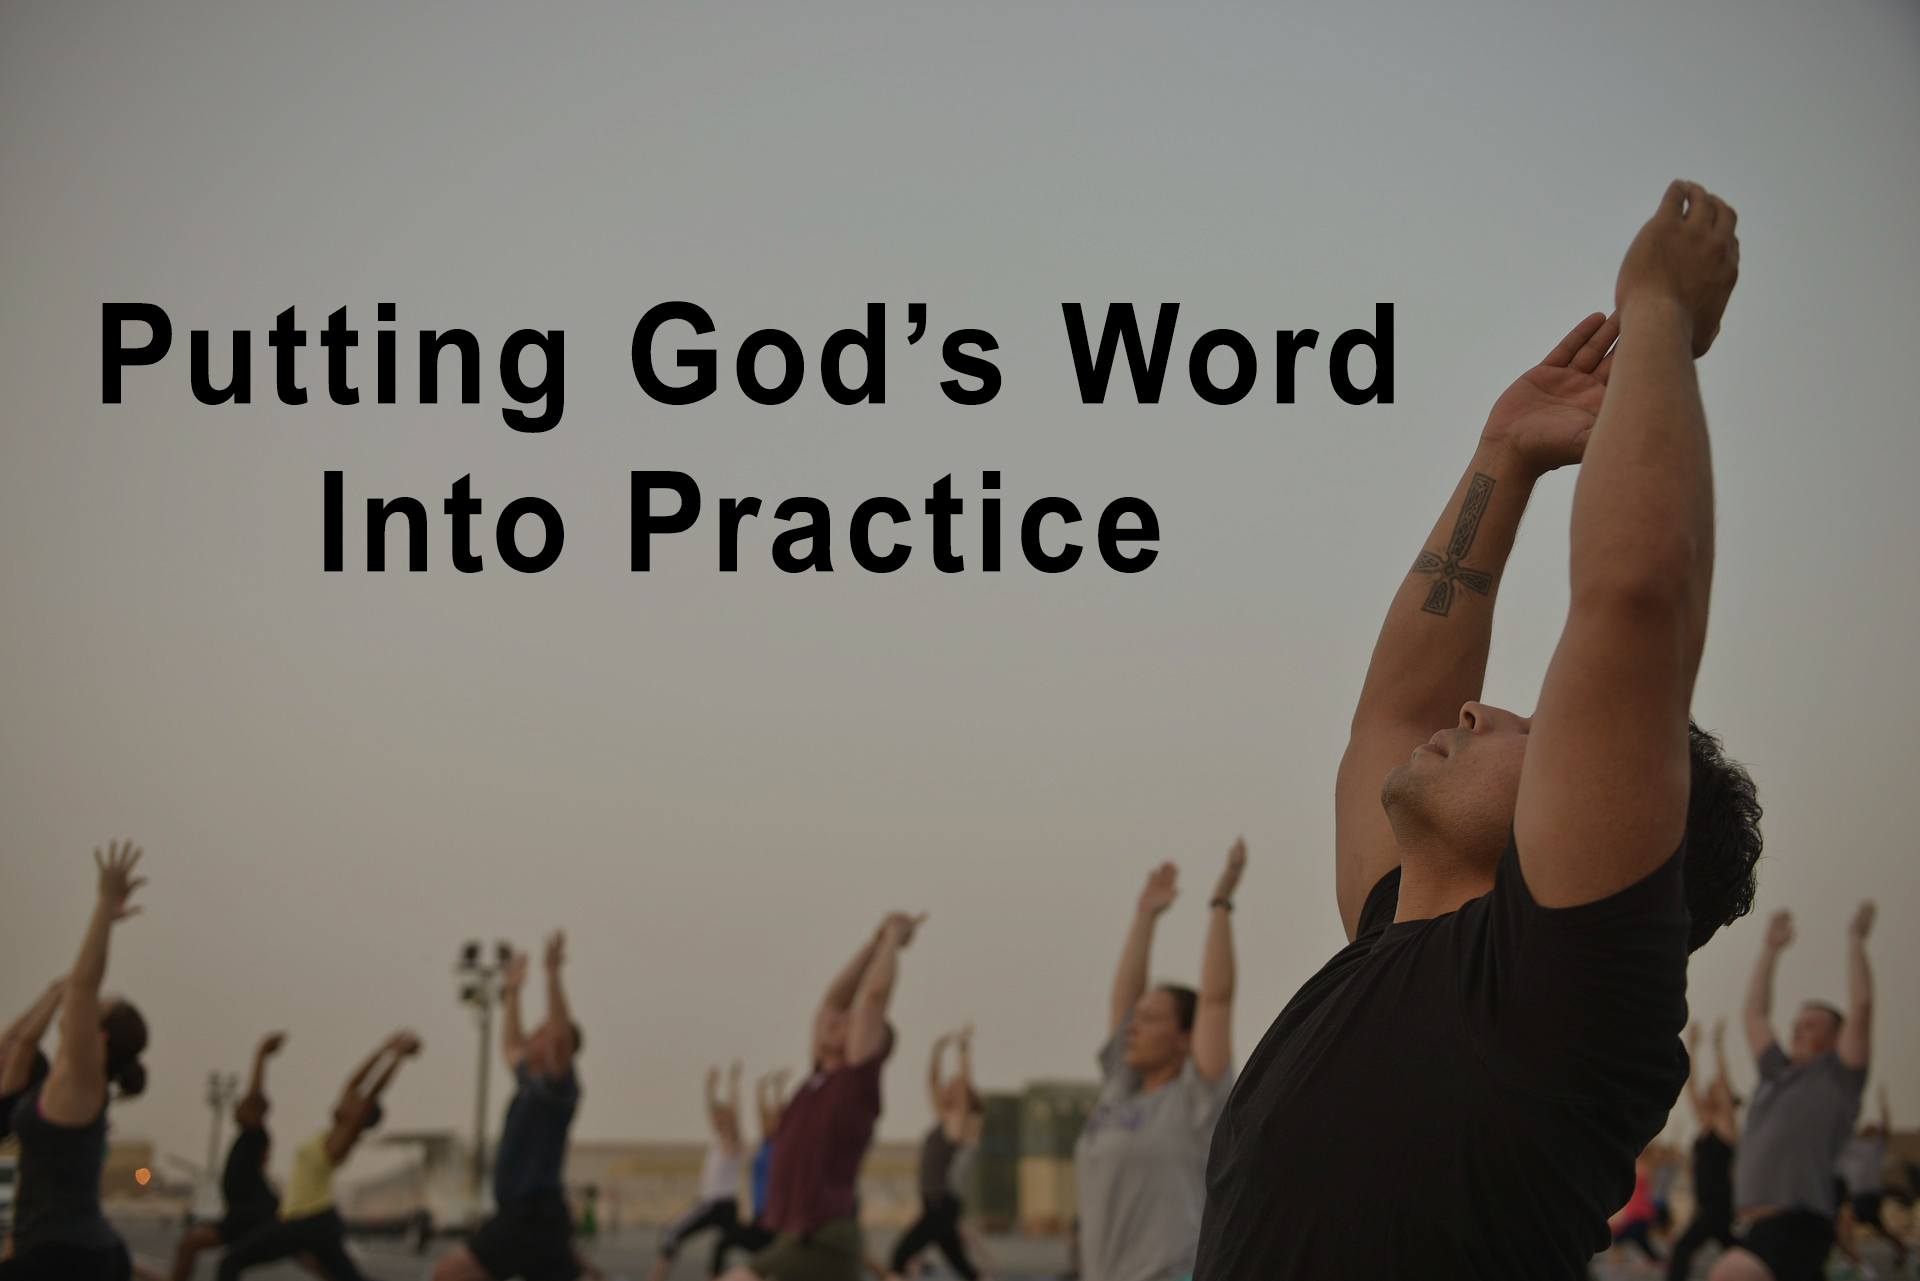 “Putting God’s Word Into Practice”